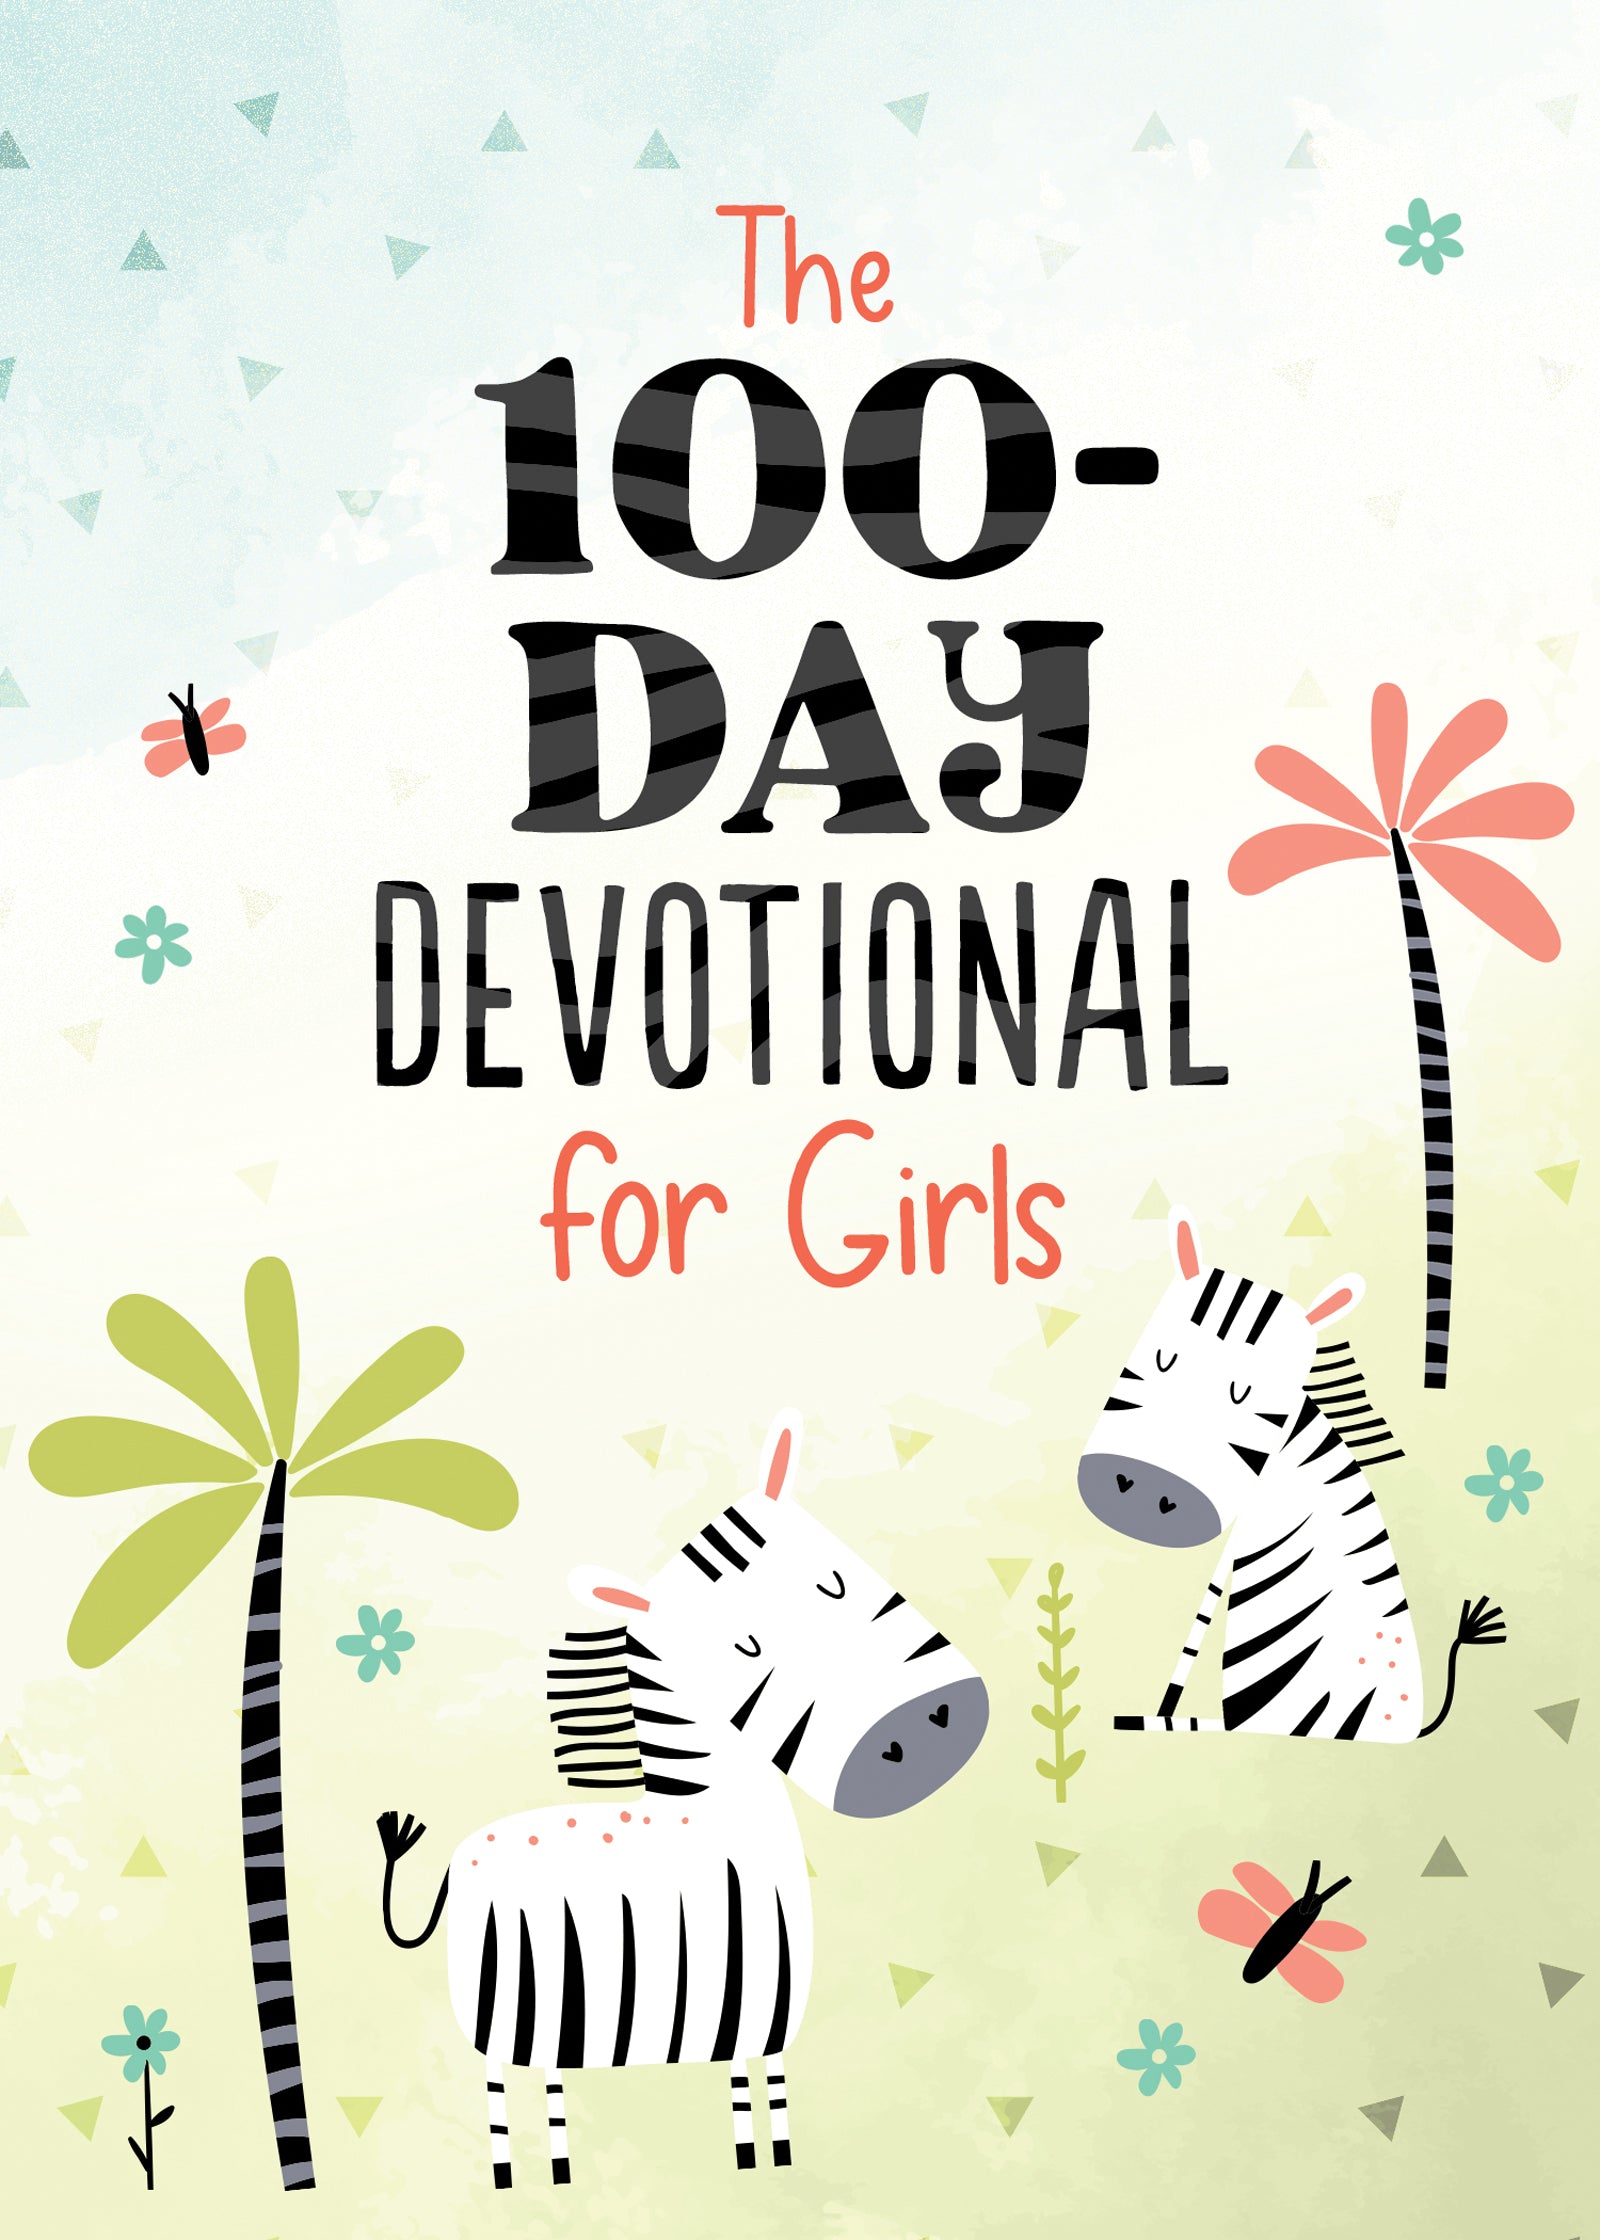 The 100-Day Devotional for Girls - The Christian Gift Company